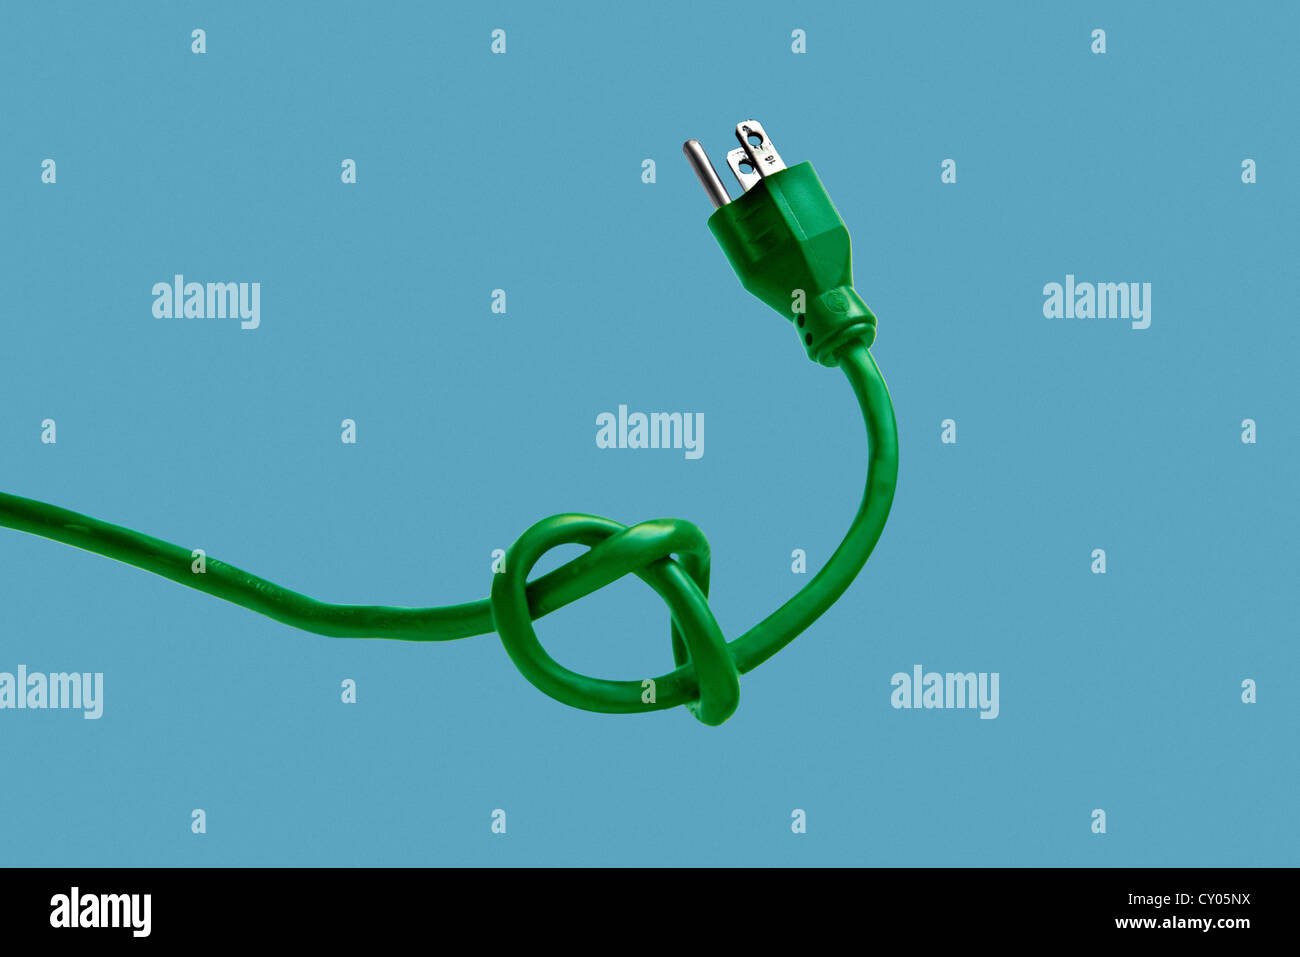 green 3 prong plug tied in knot Stock Photo